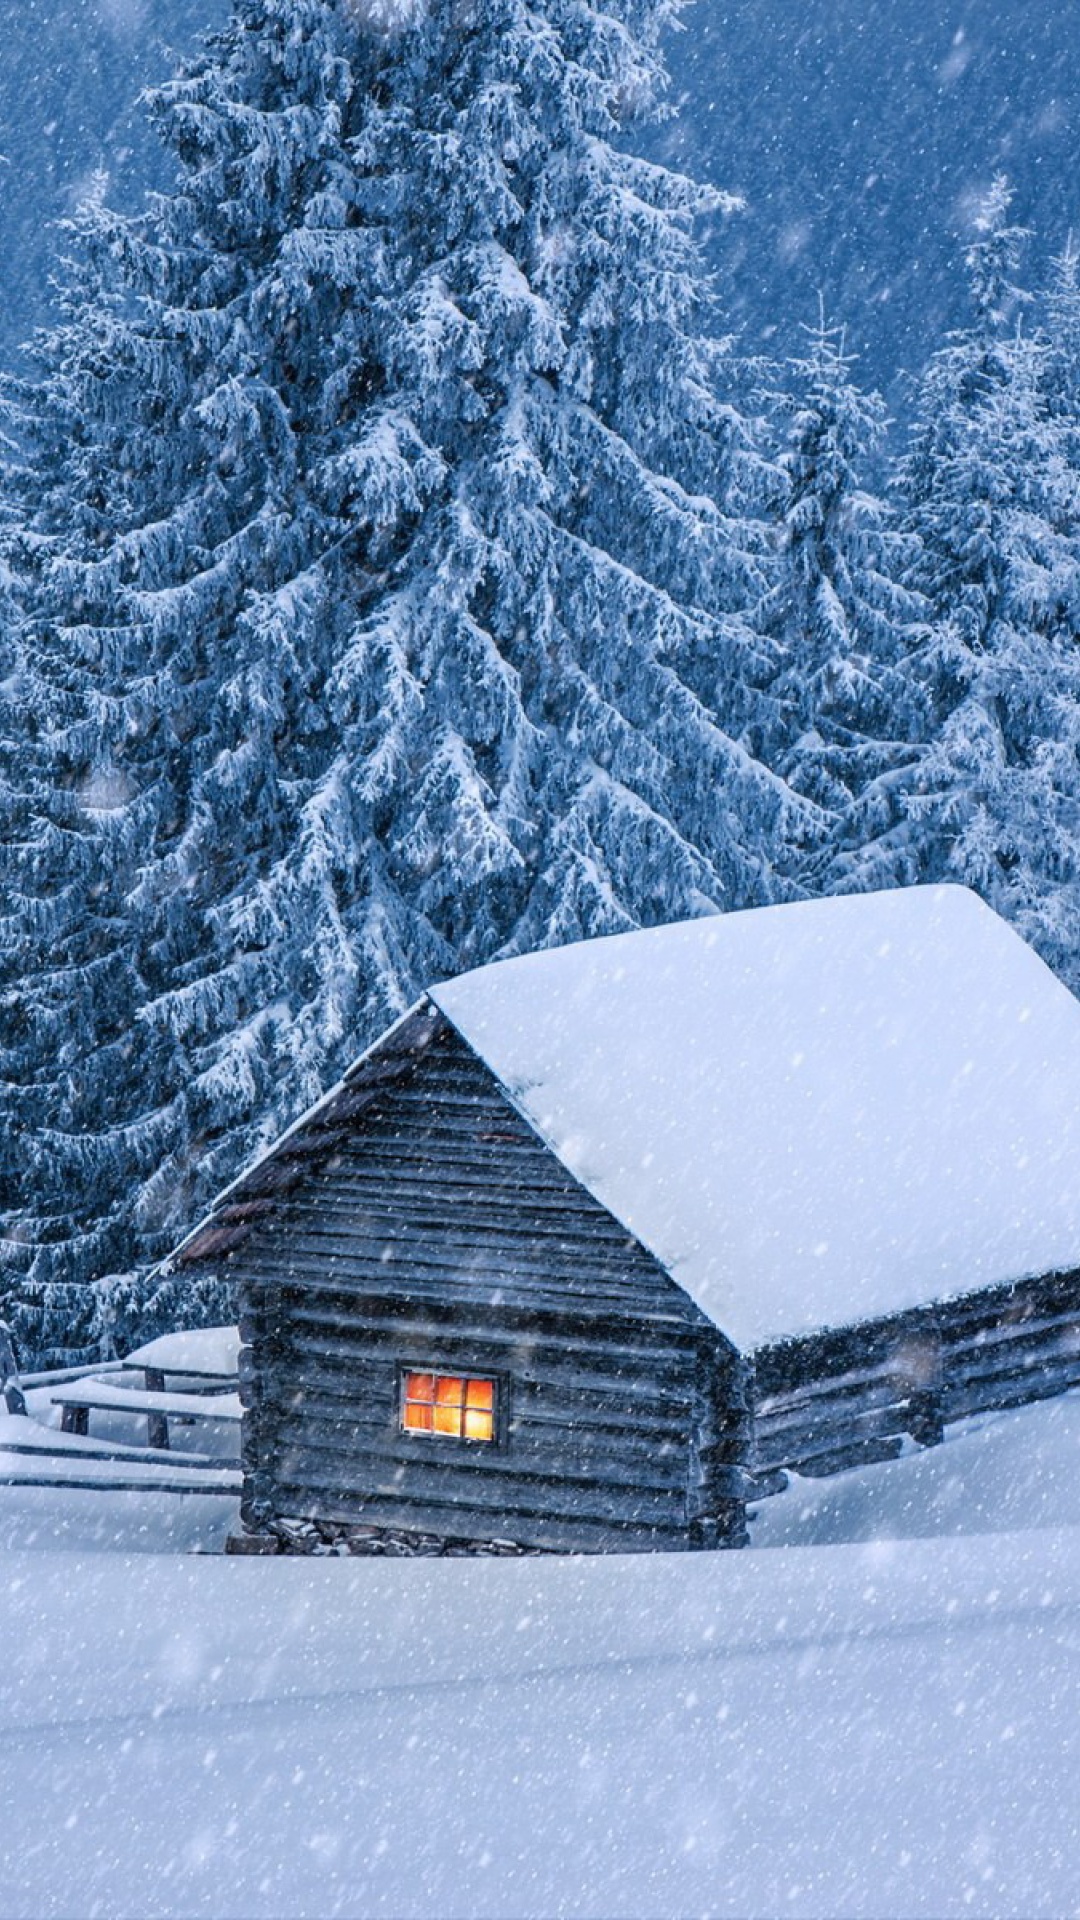 House in winter forest wallpaper 1080x1920